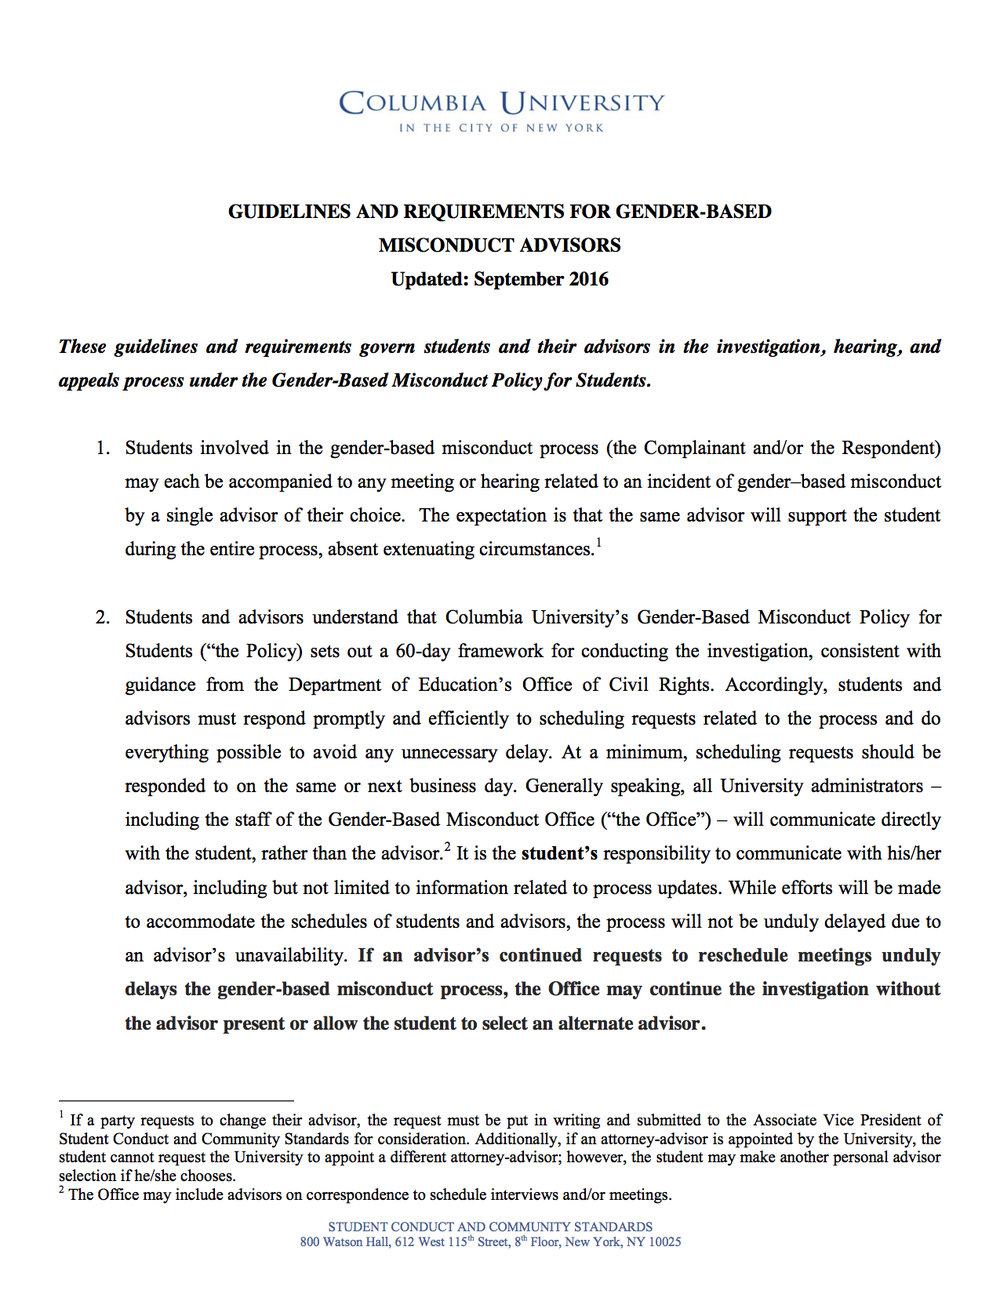 Guidelines and Requirements for Gender-Based Misconduct Advisors(1).jpg